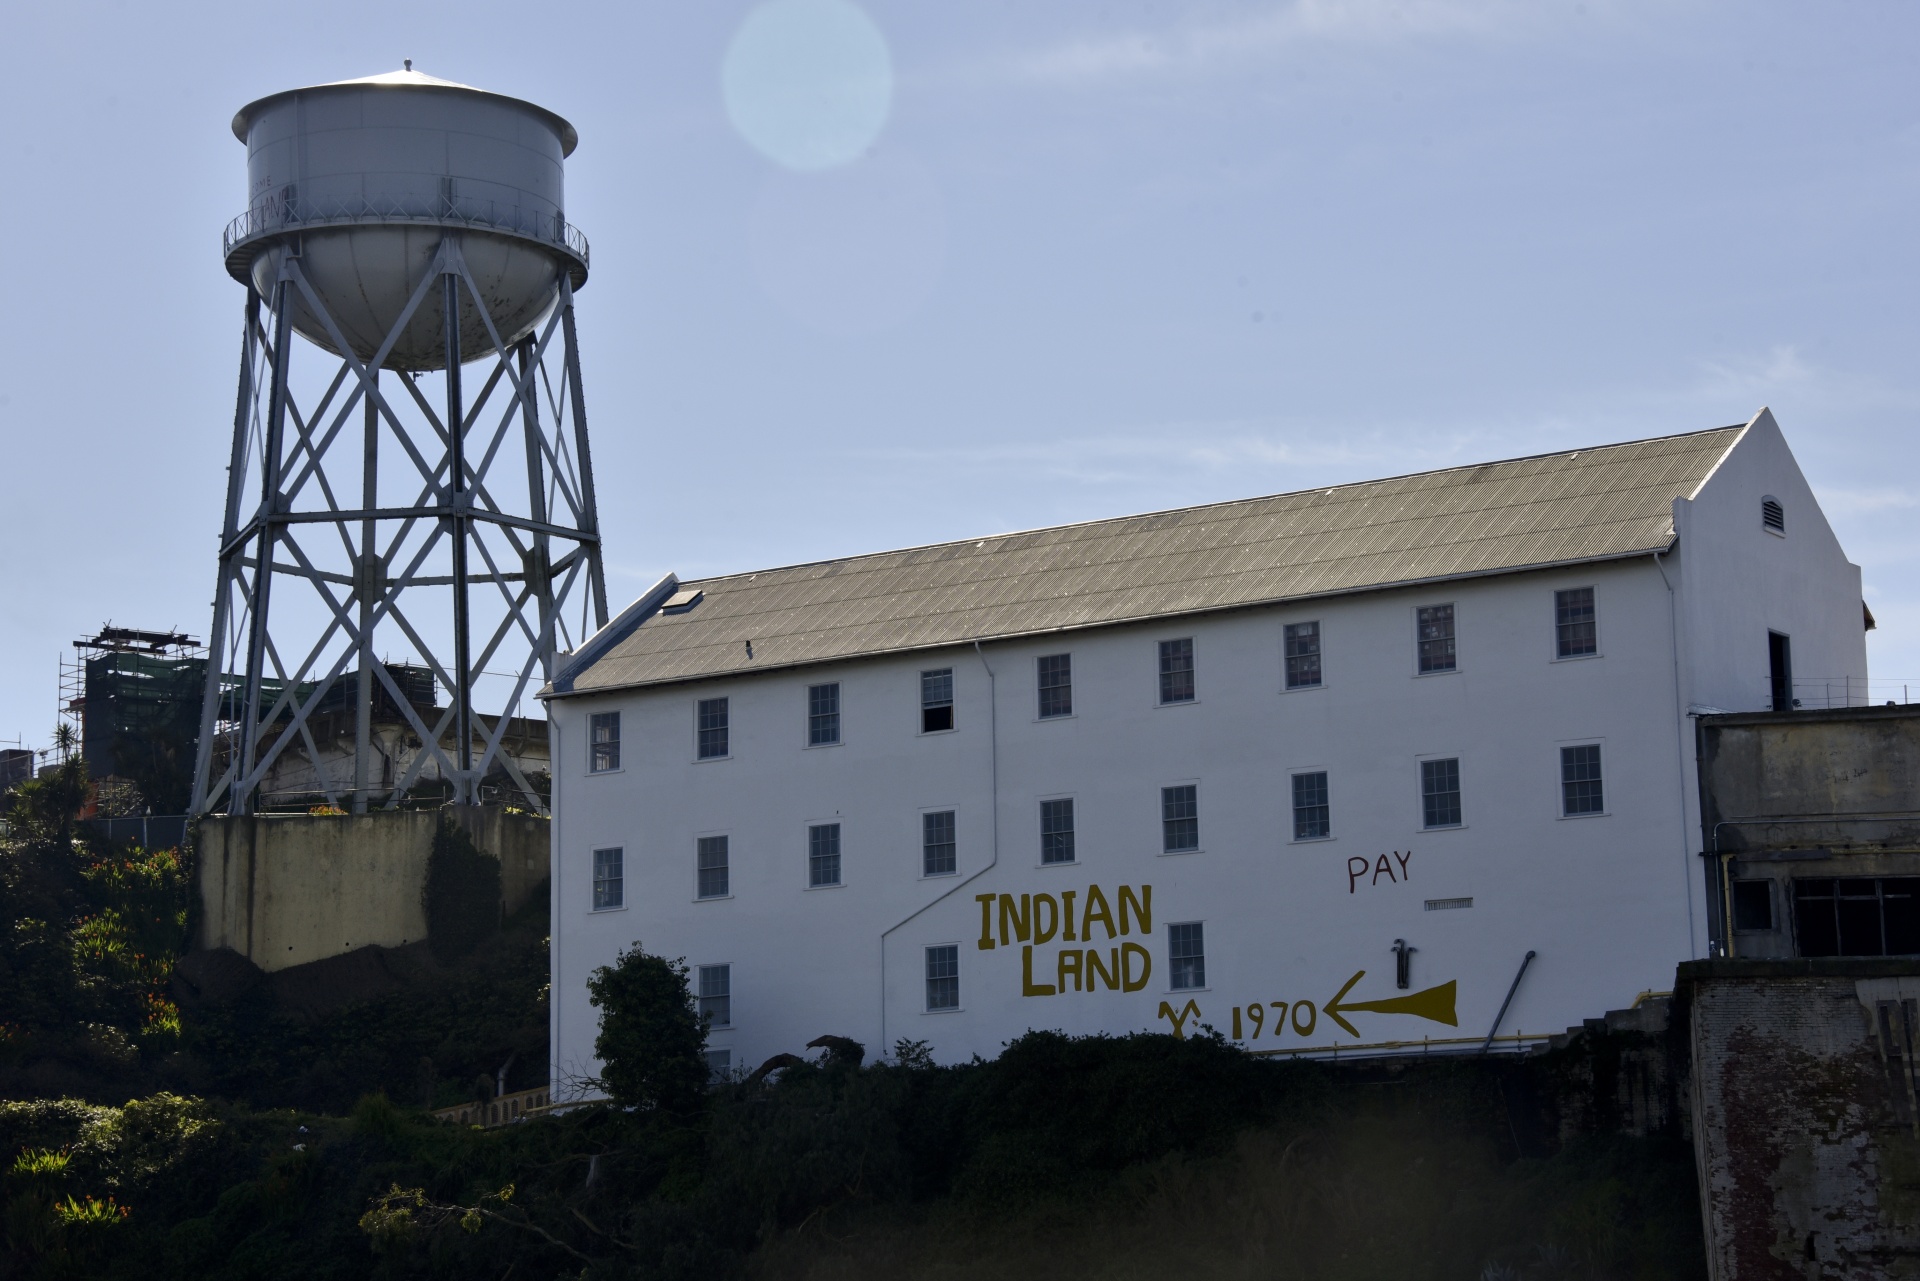 Building on Alcatraz Island and water tower